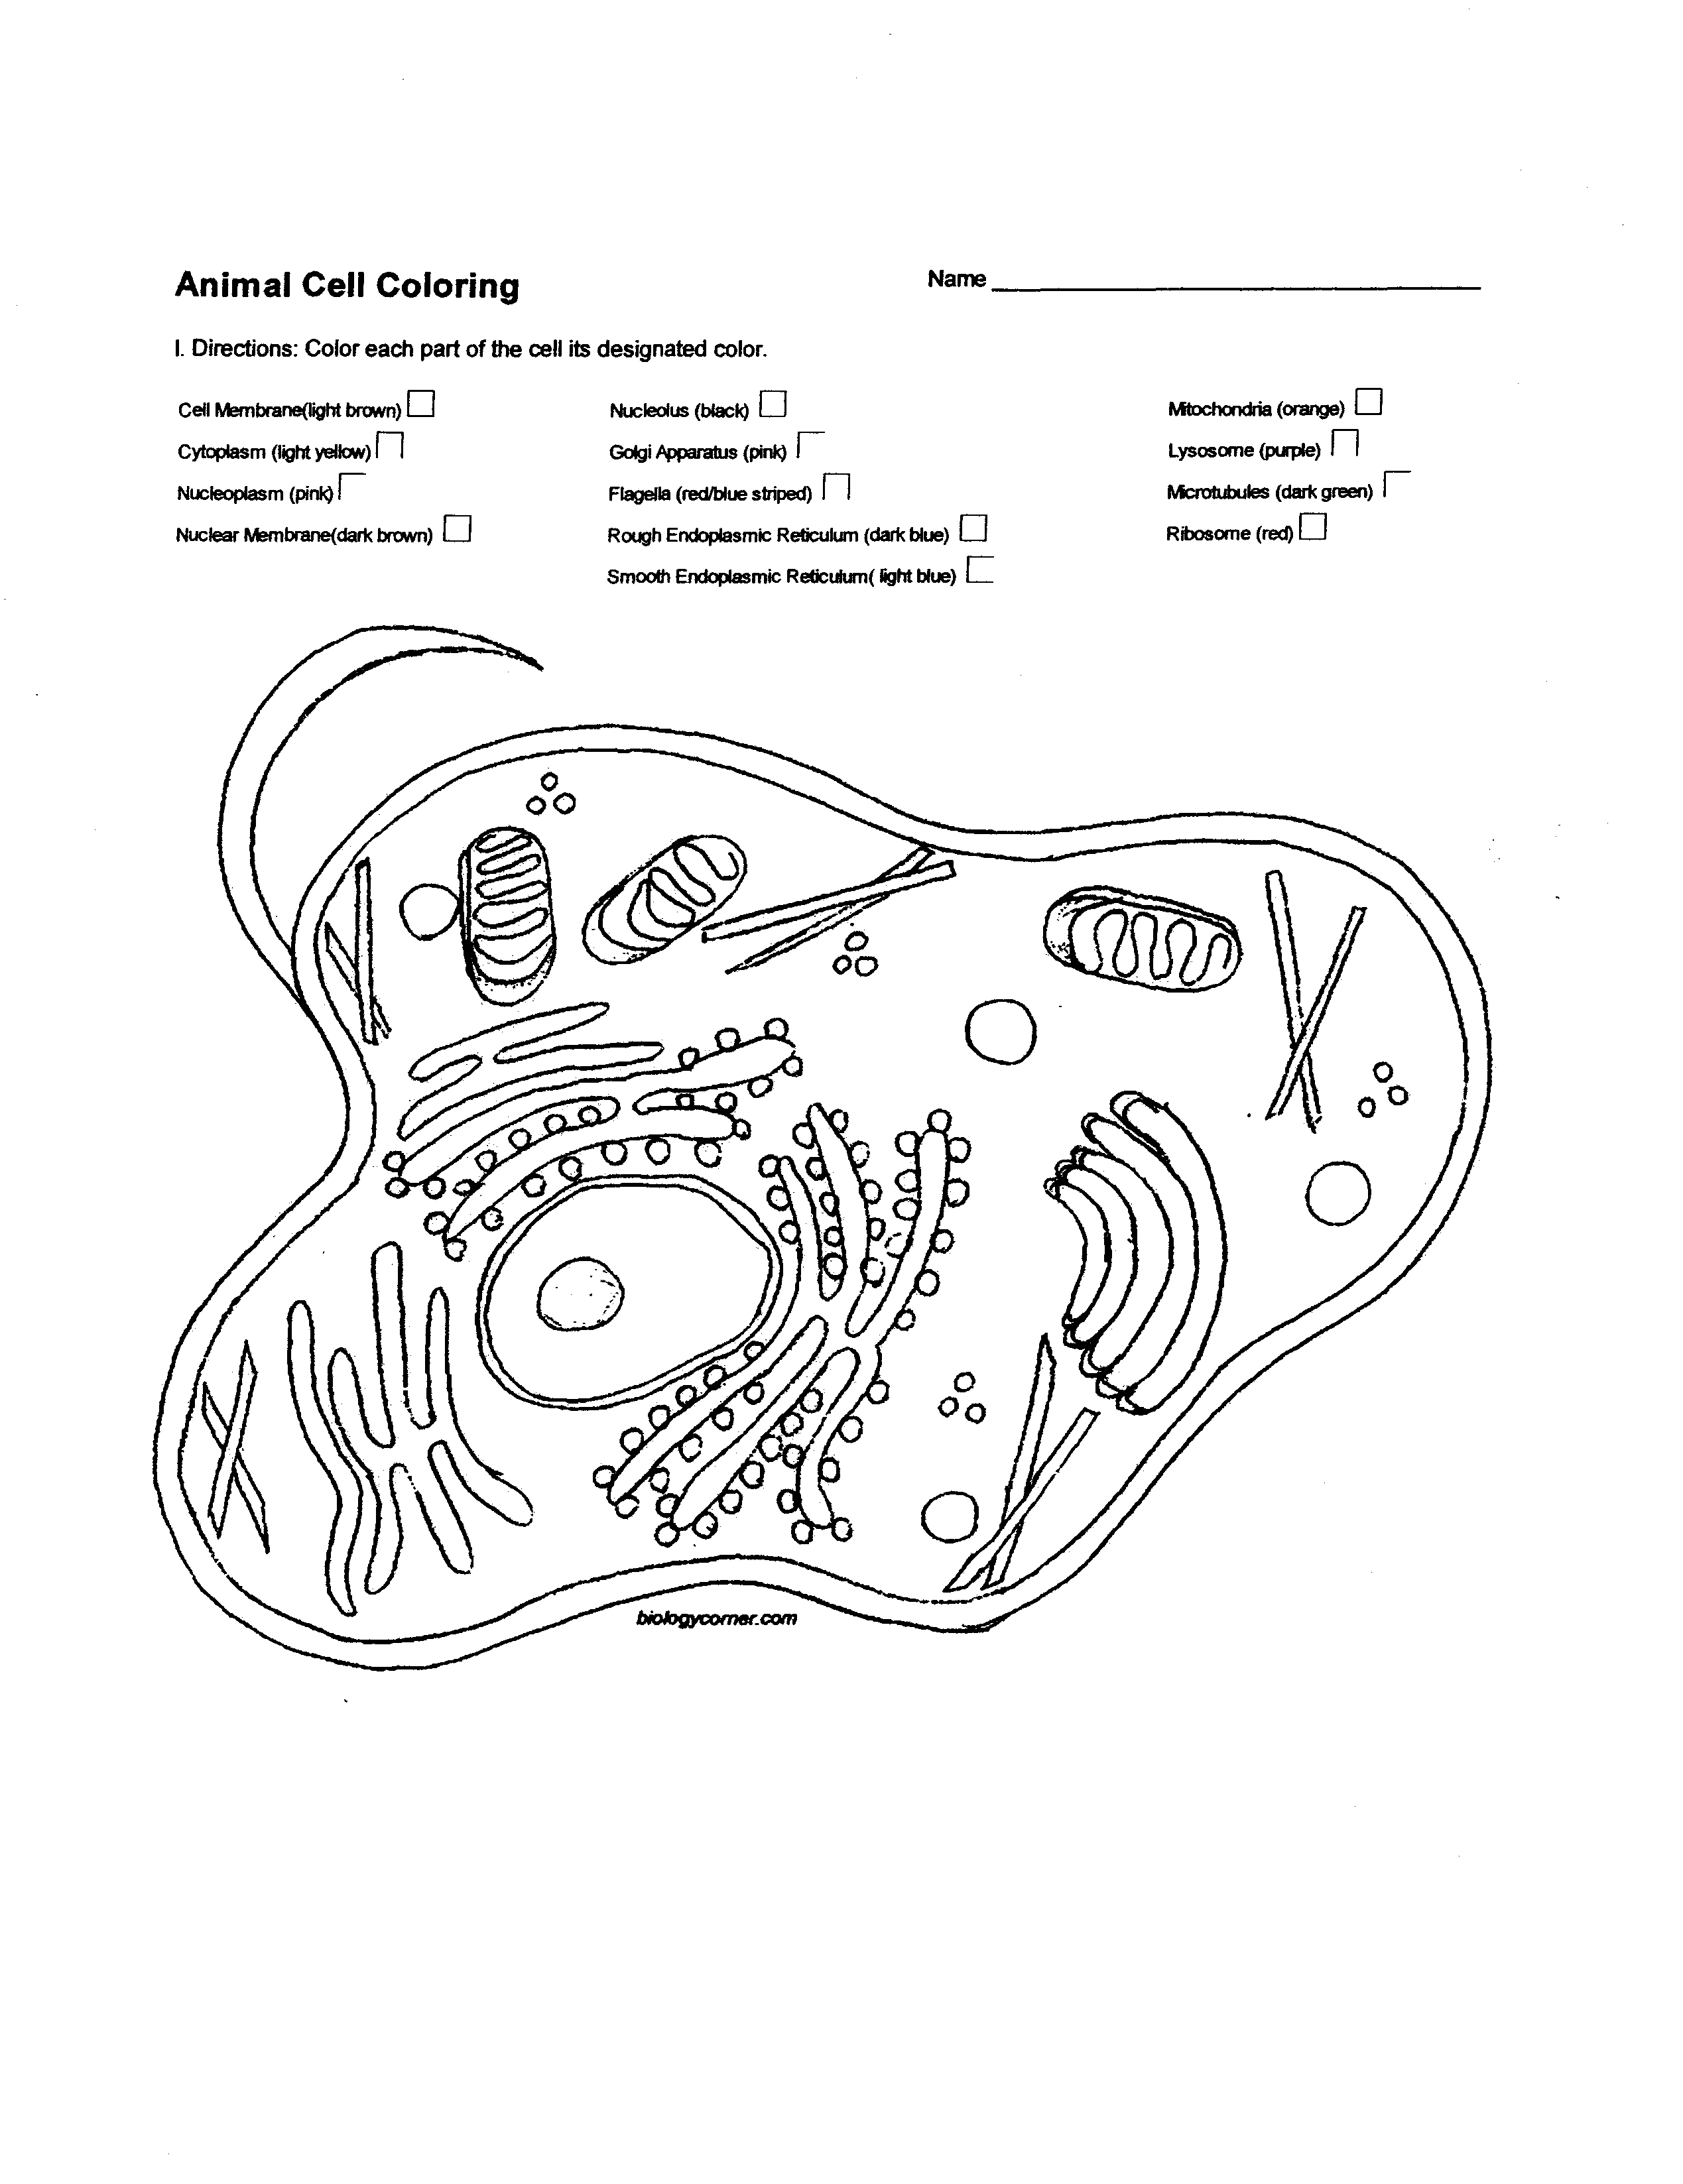 Diagram Of A Plant Cell Plant Cell Drawing At Getdrawings Free For Personal Use Plant